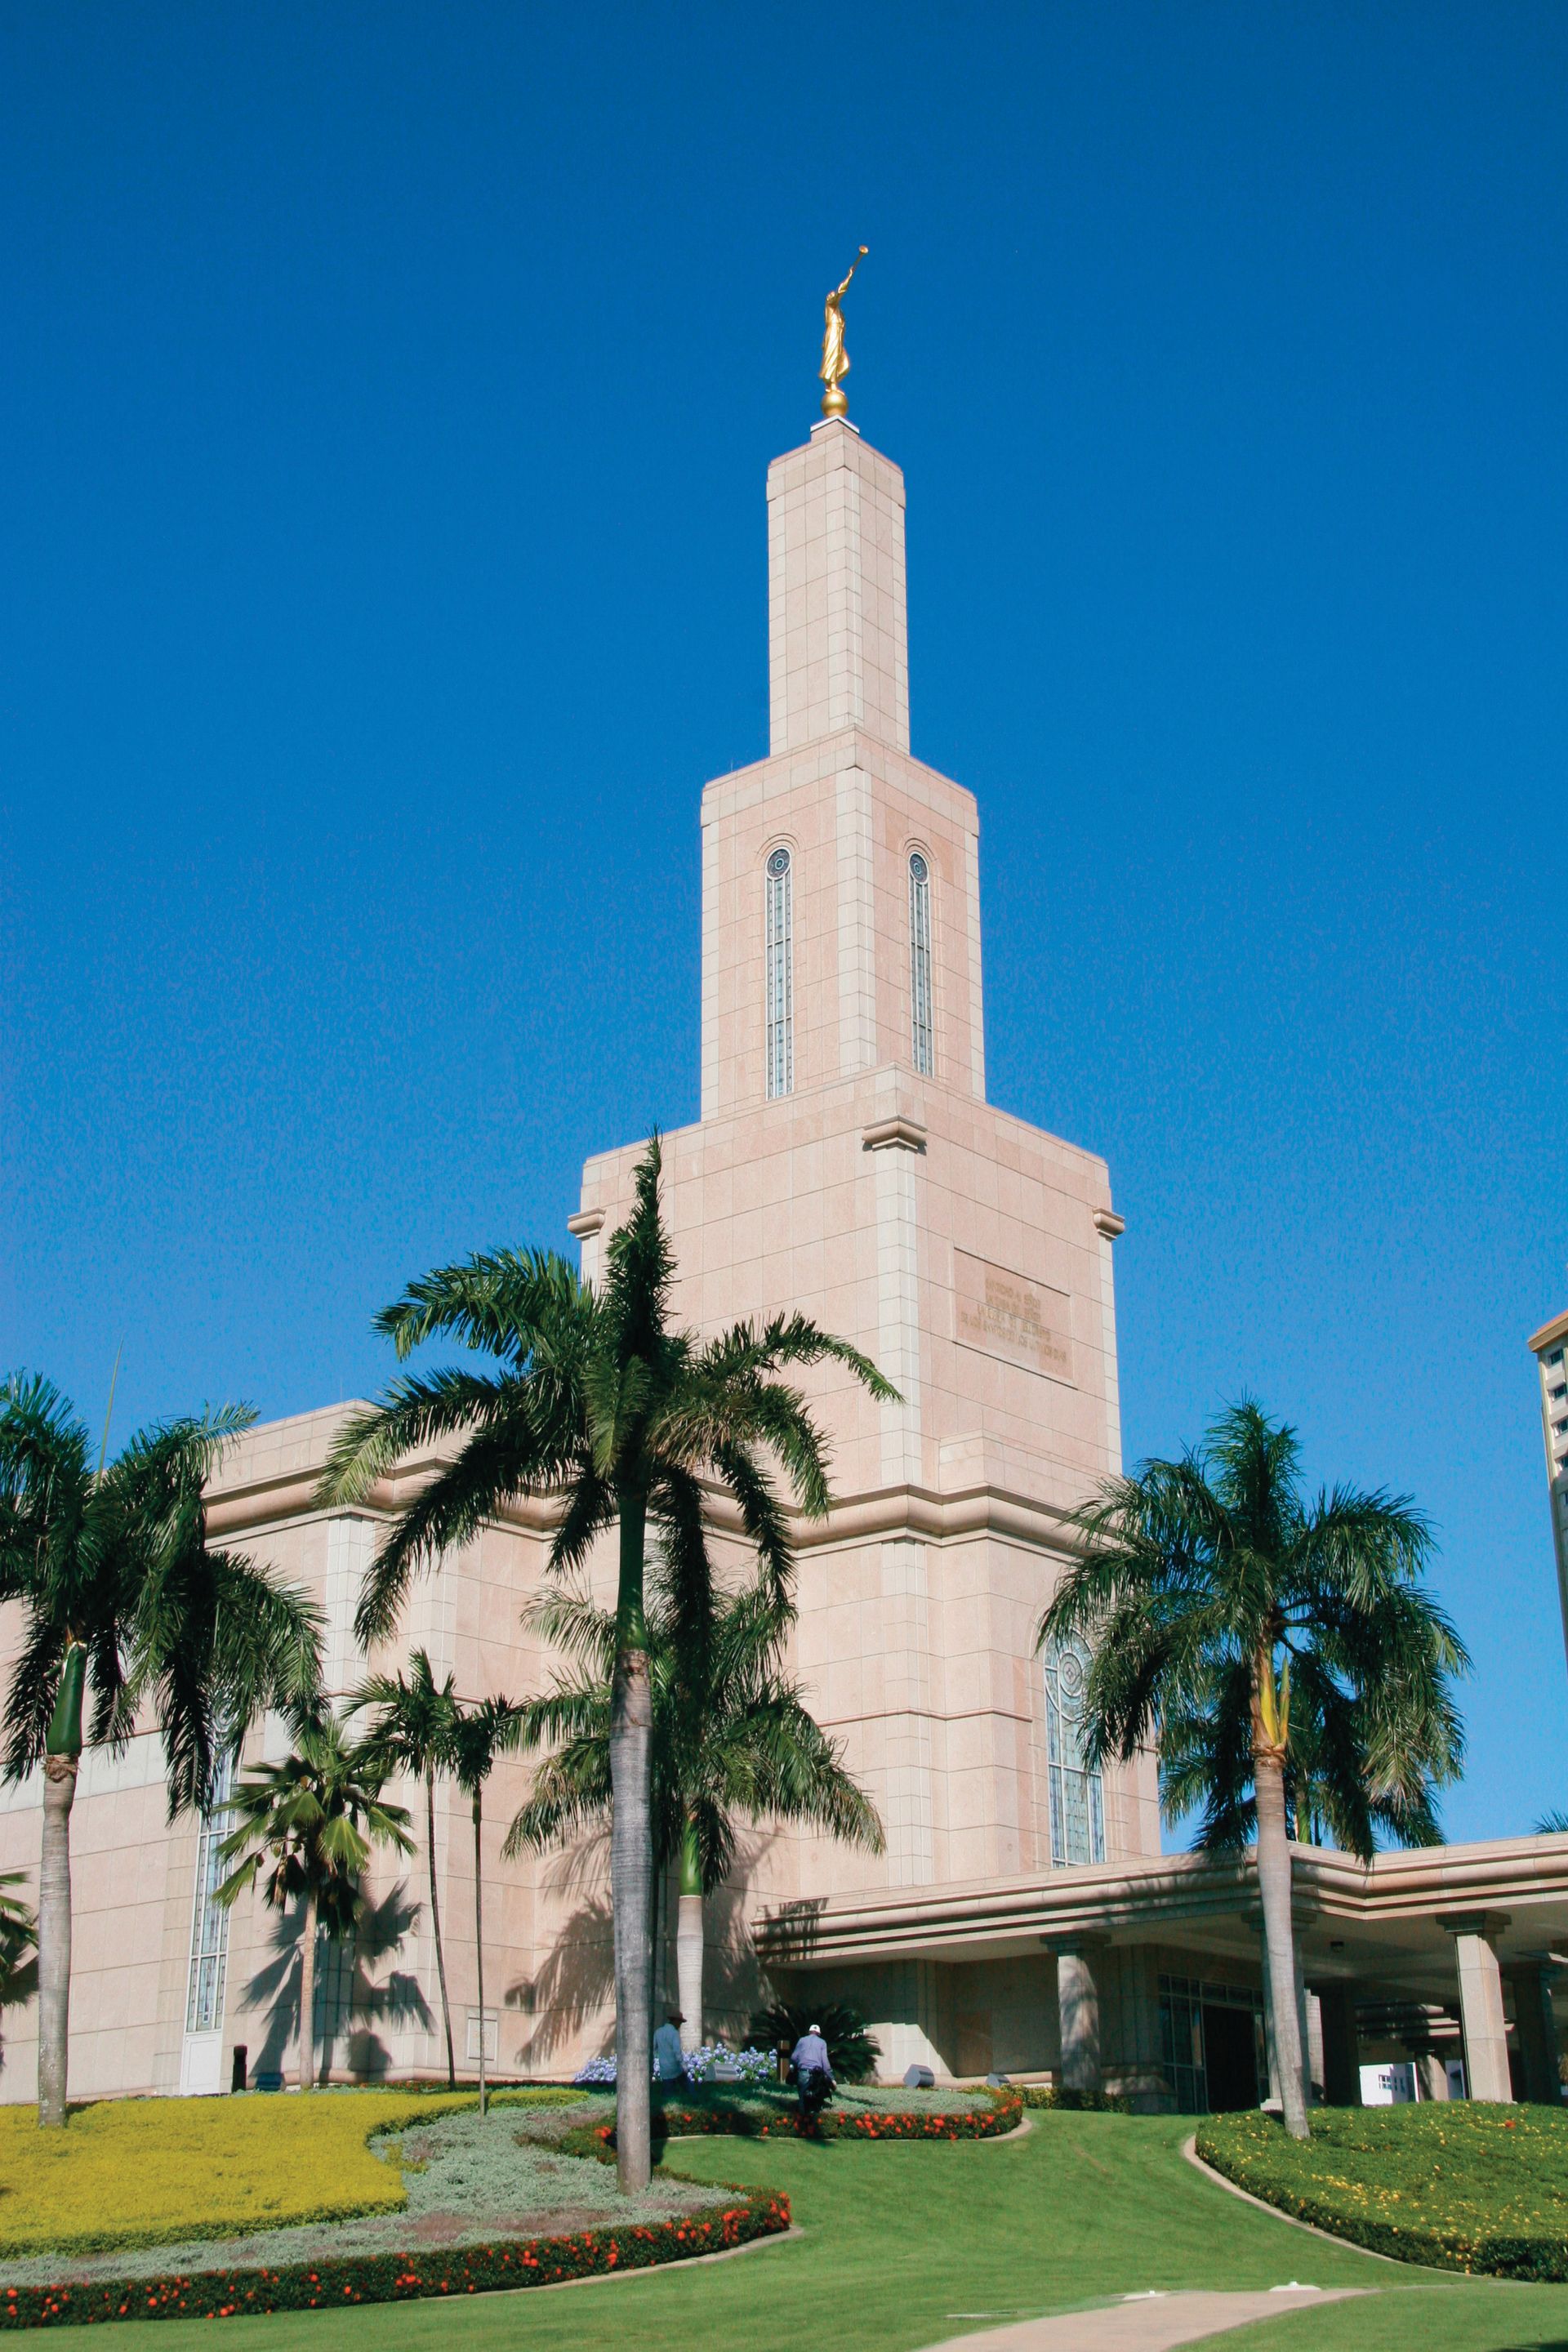 The Santo Domingo Dominican Republic Temple side view, including the entrance and scenery.